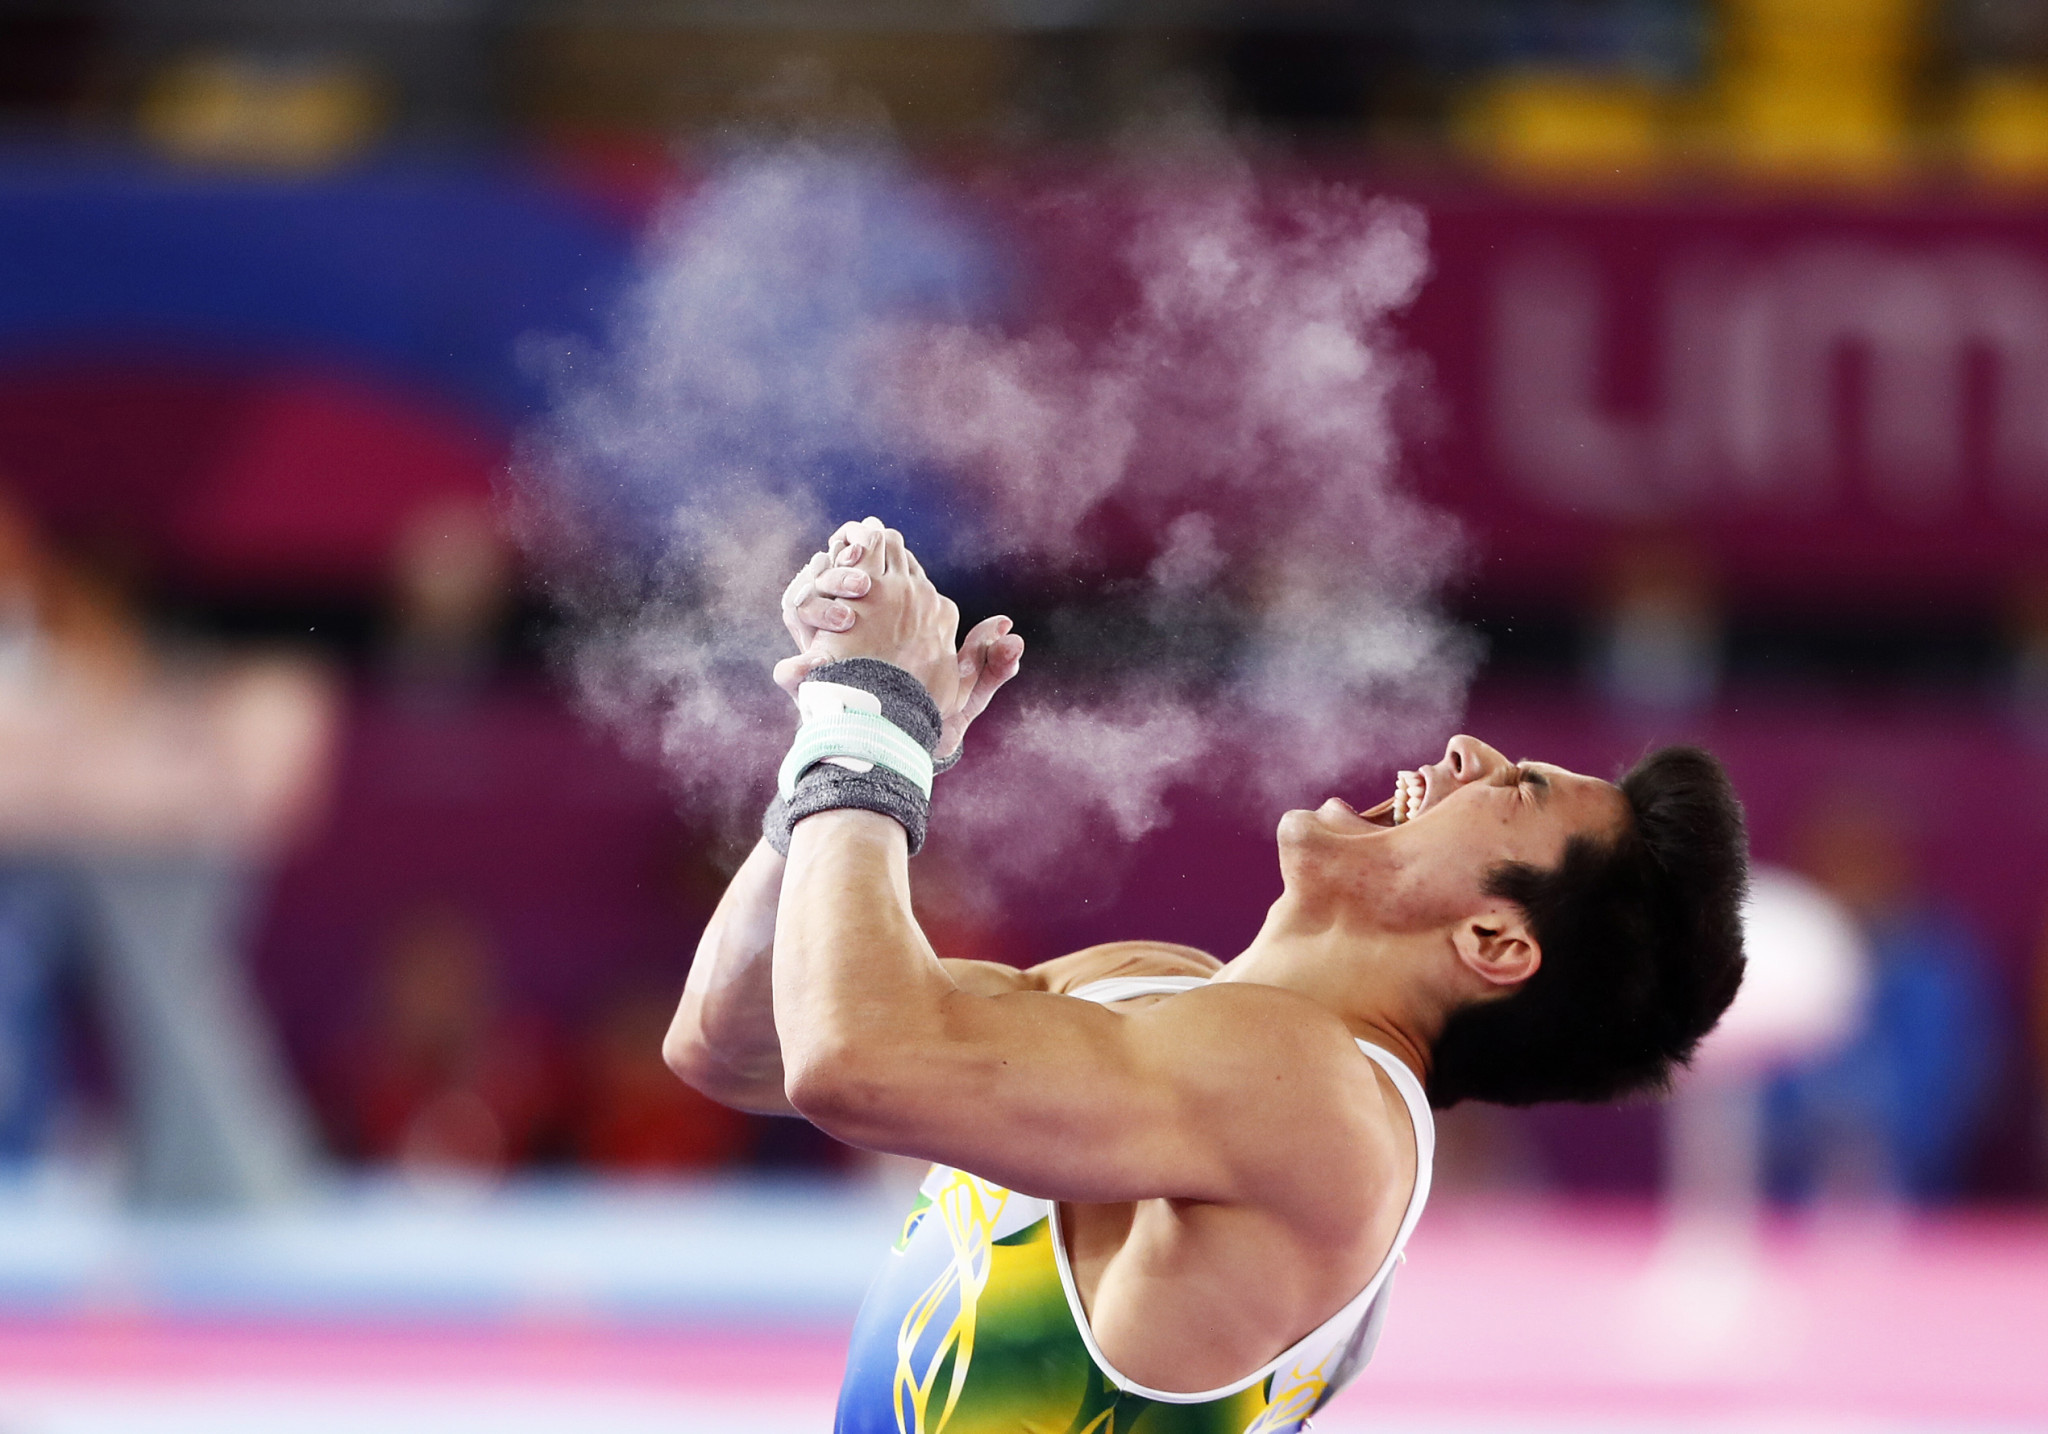 Brazil enjoyed success in the men's individual all-around gymnastics competition ©Lima 2019